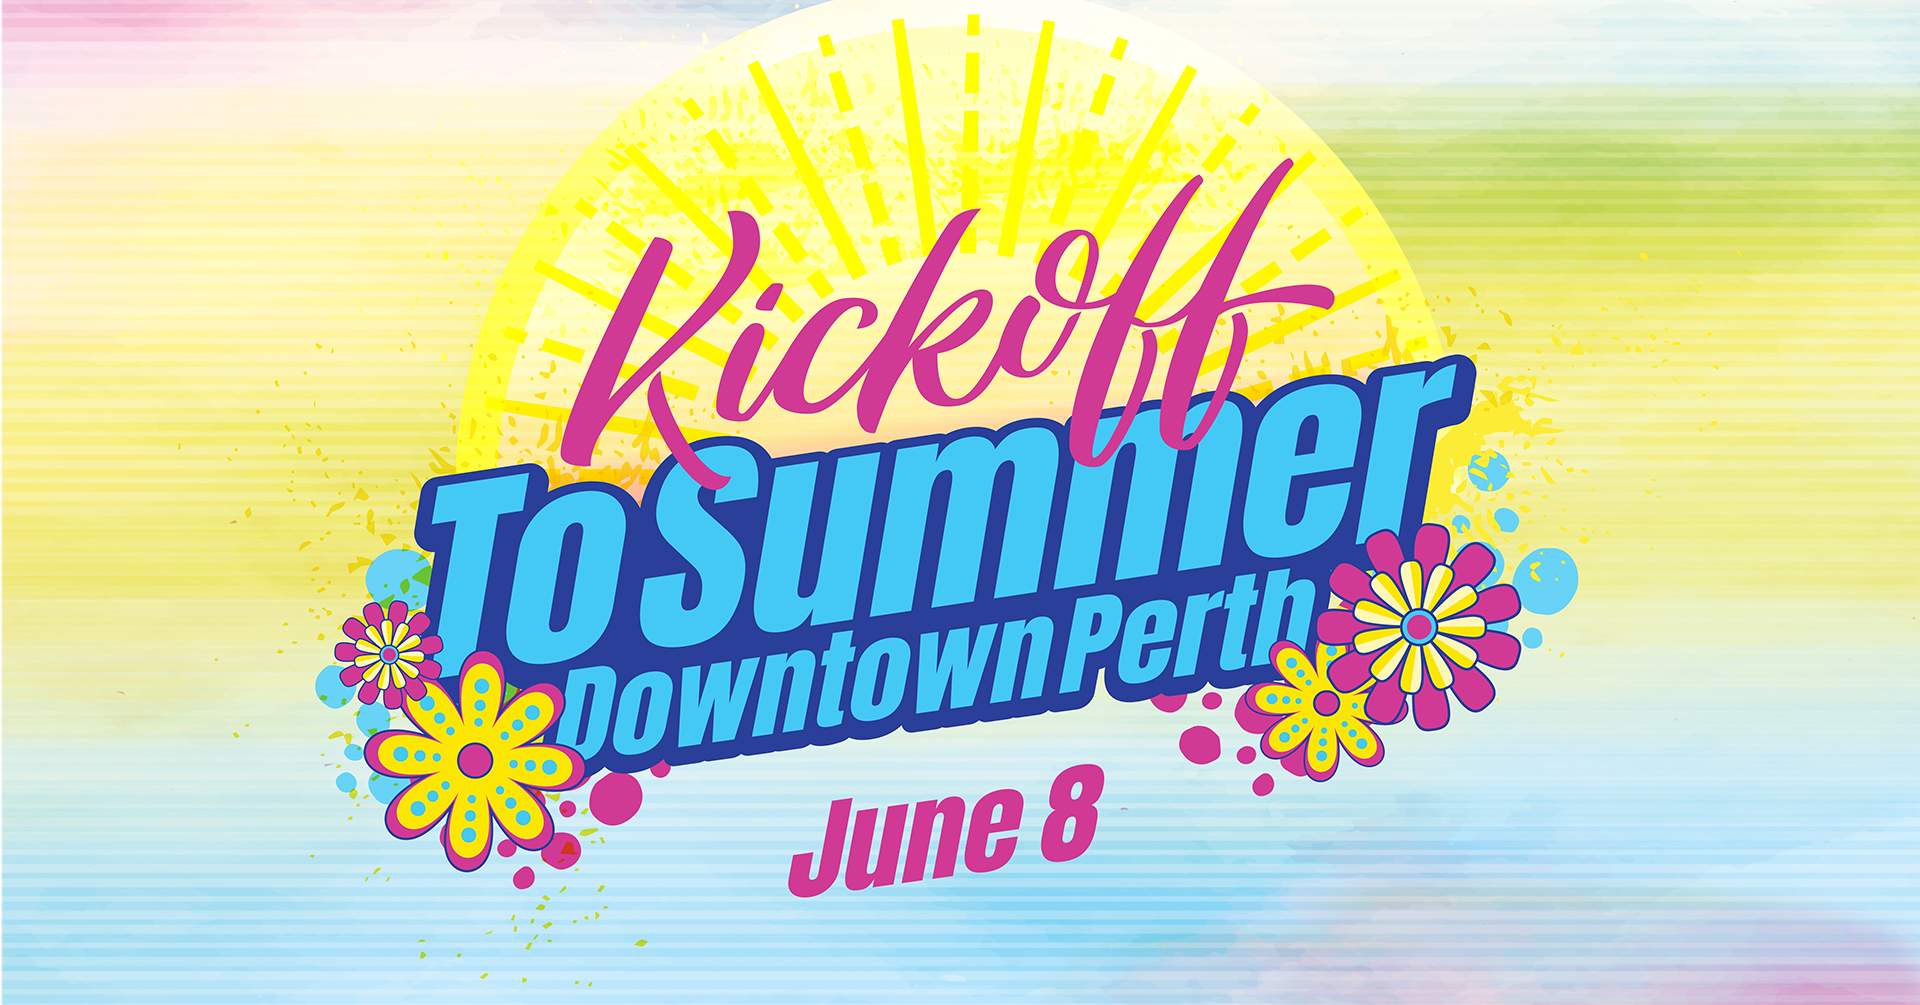  Kick off to Summer in Downtown Perth